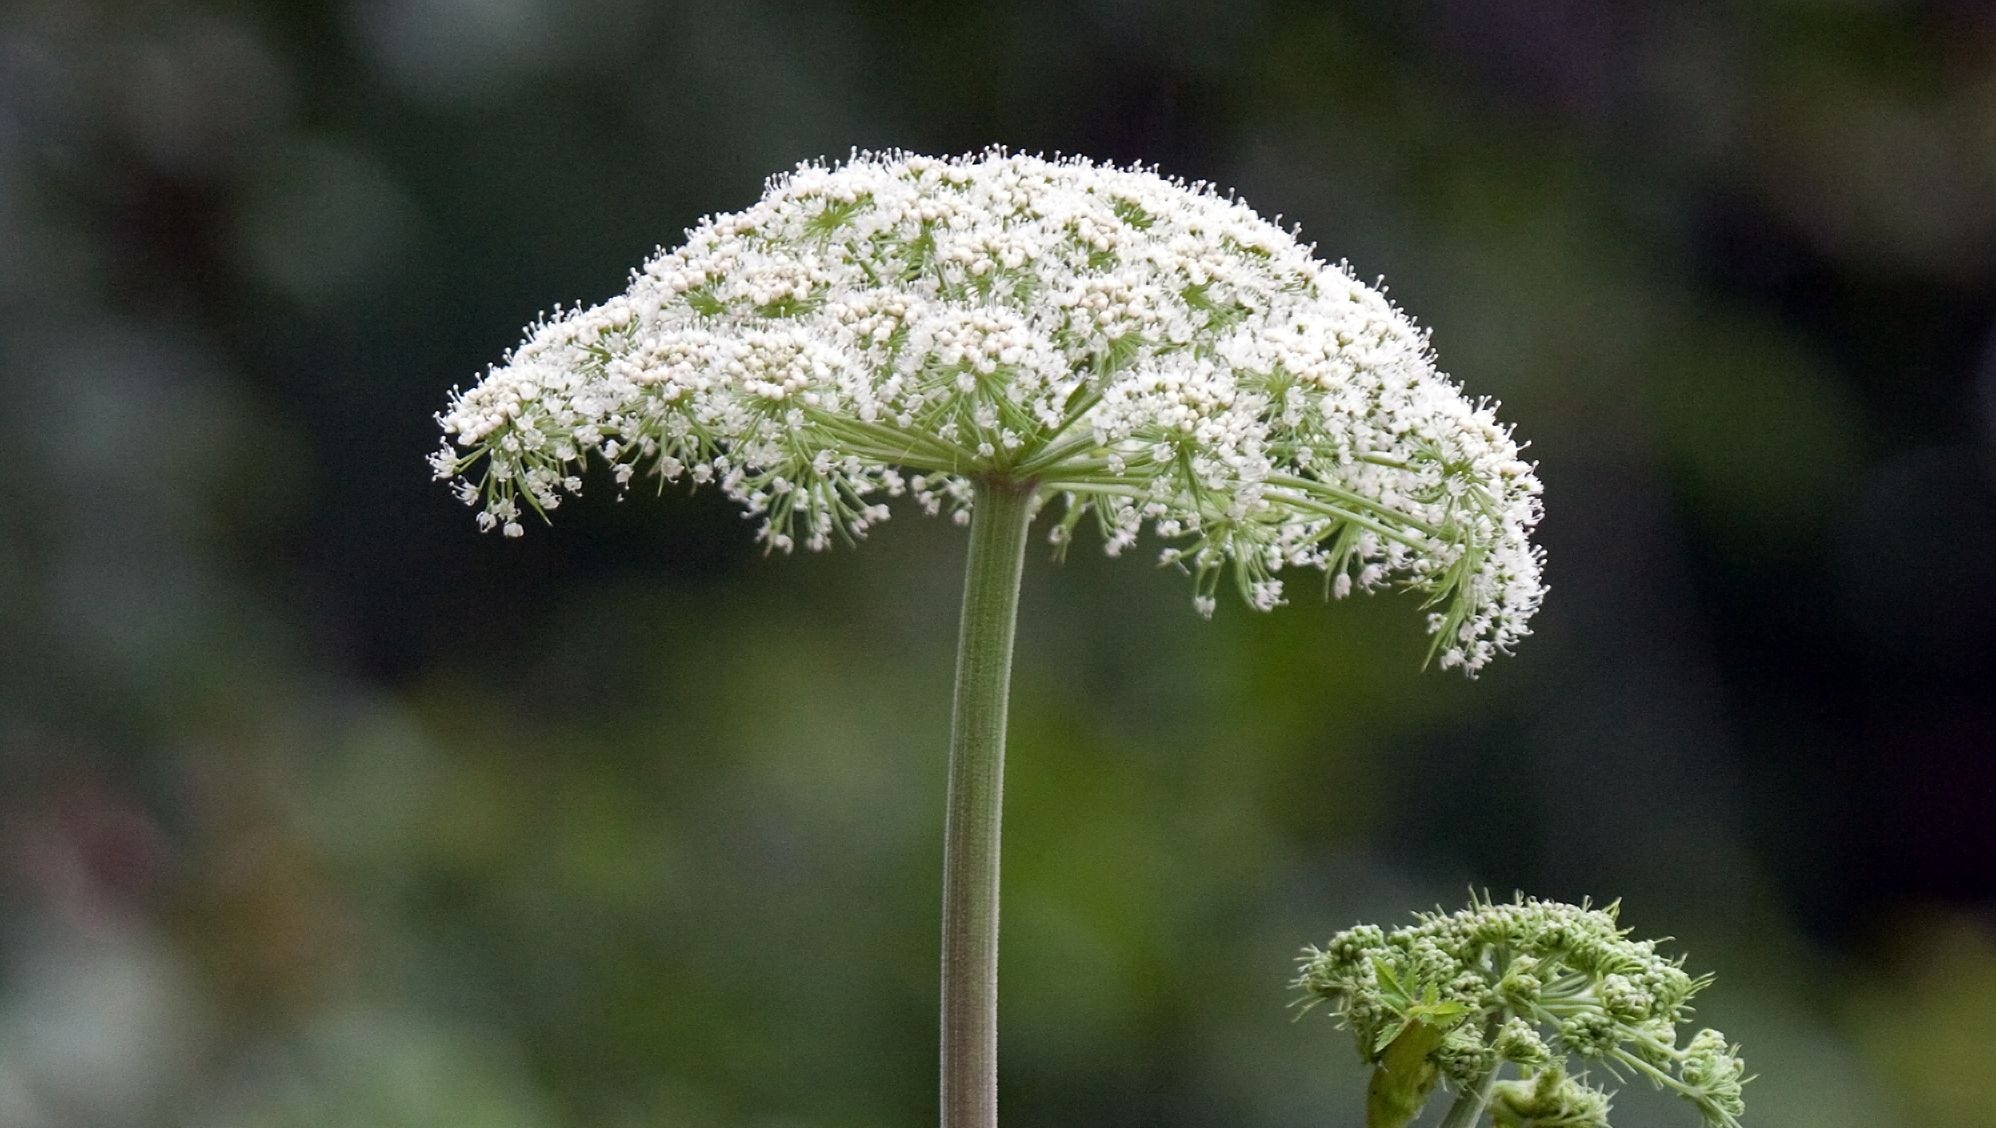 Giant Hogweed, which can cause and blindness, found in Virginia